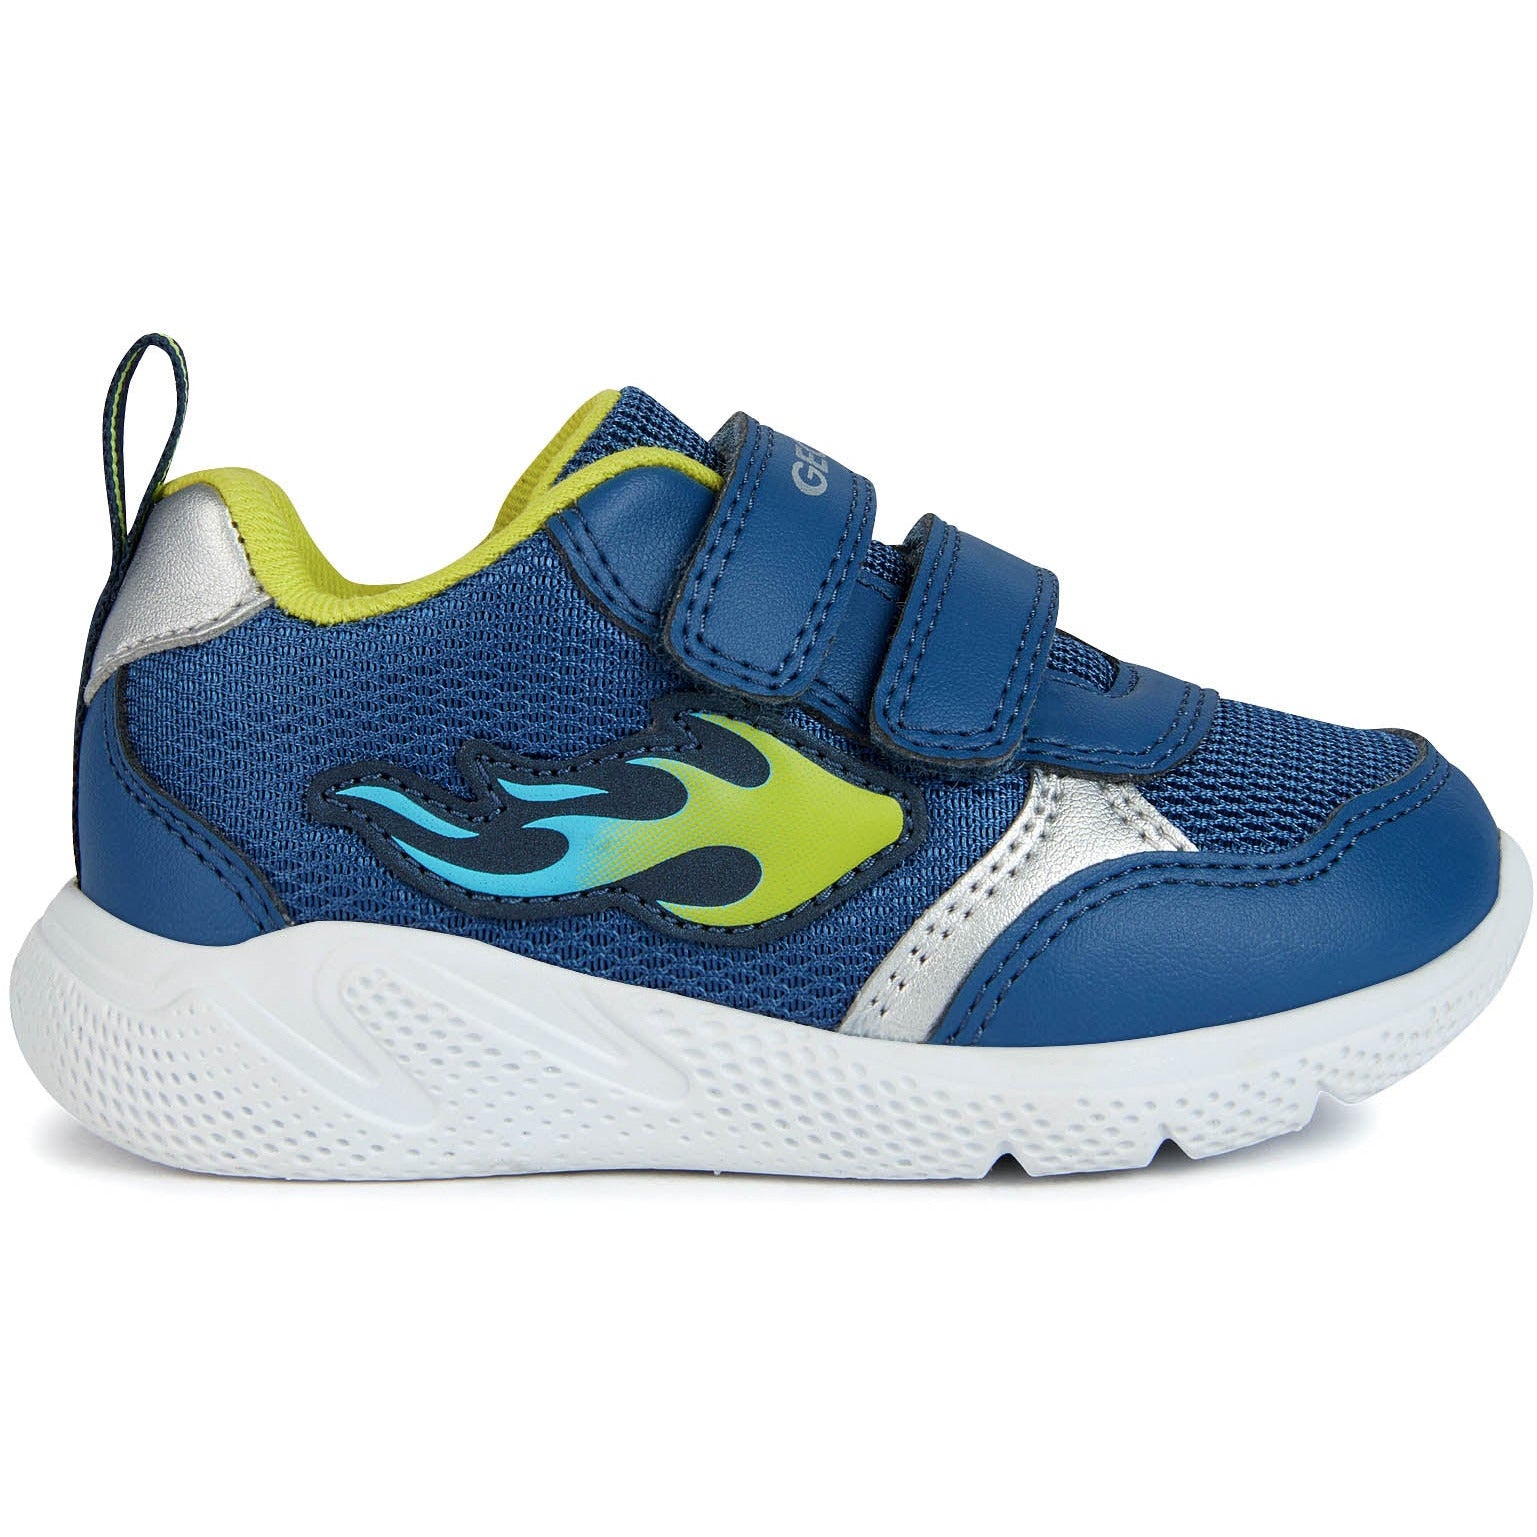 GEOX Sprintye(B354UC)- Boys Velcro Trainer in Jeans/Lime.  Geox Shoes | Childrens Shoe Fitting | Wisemans | Bantry | West Cork | Ireland